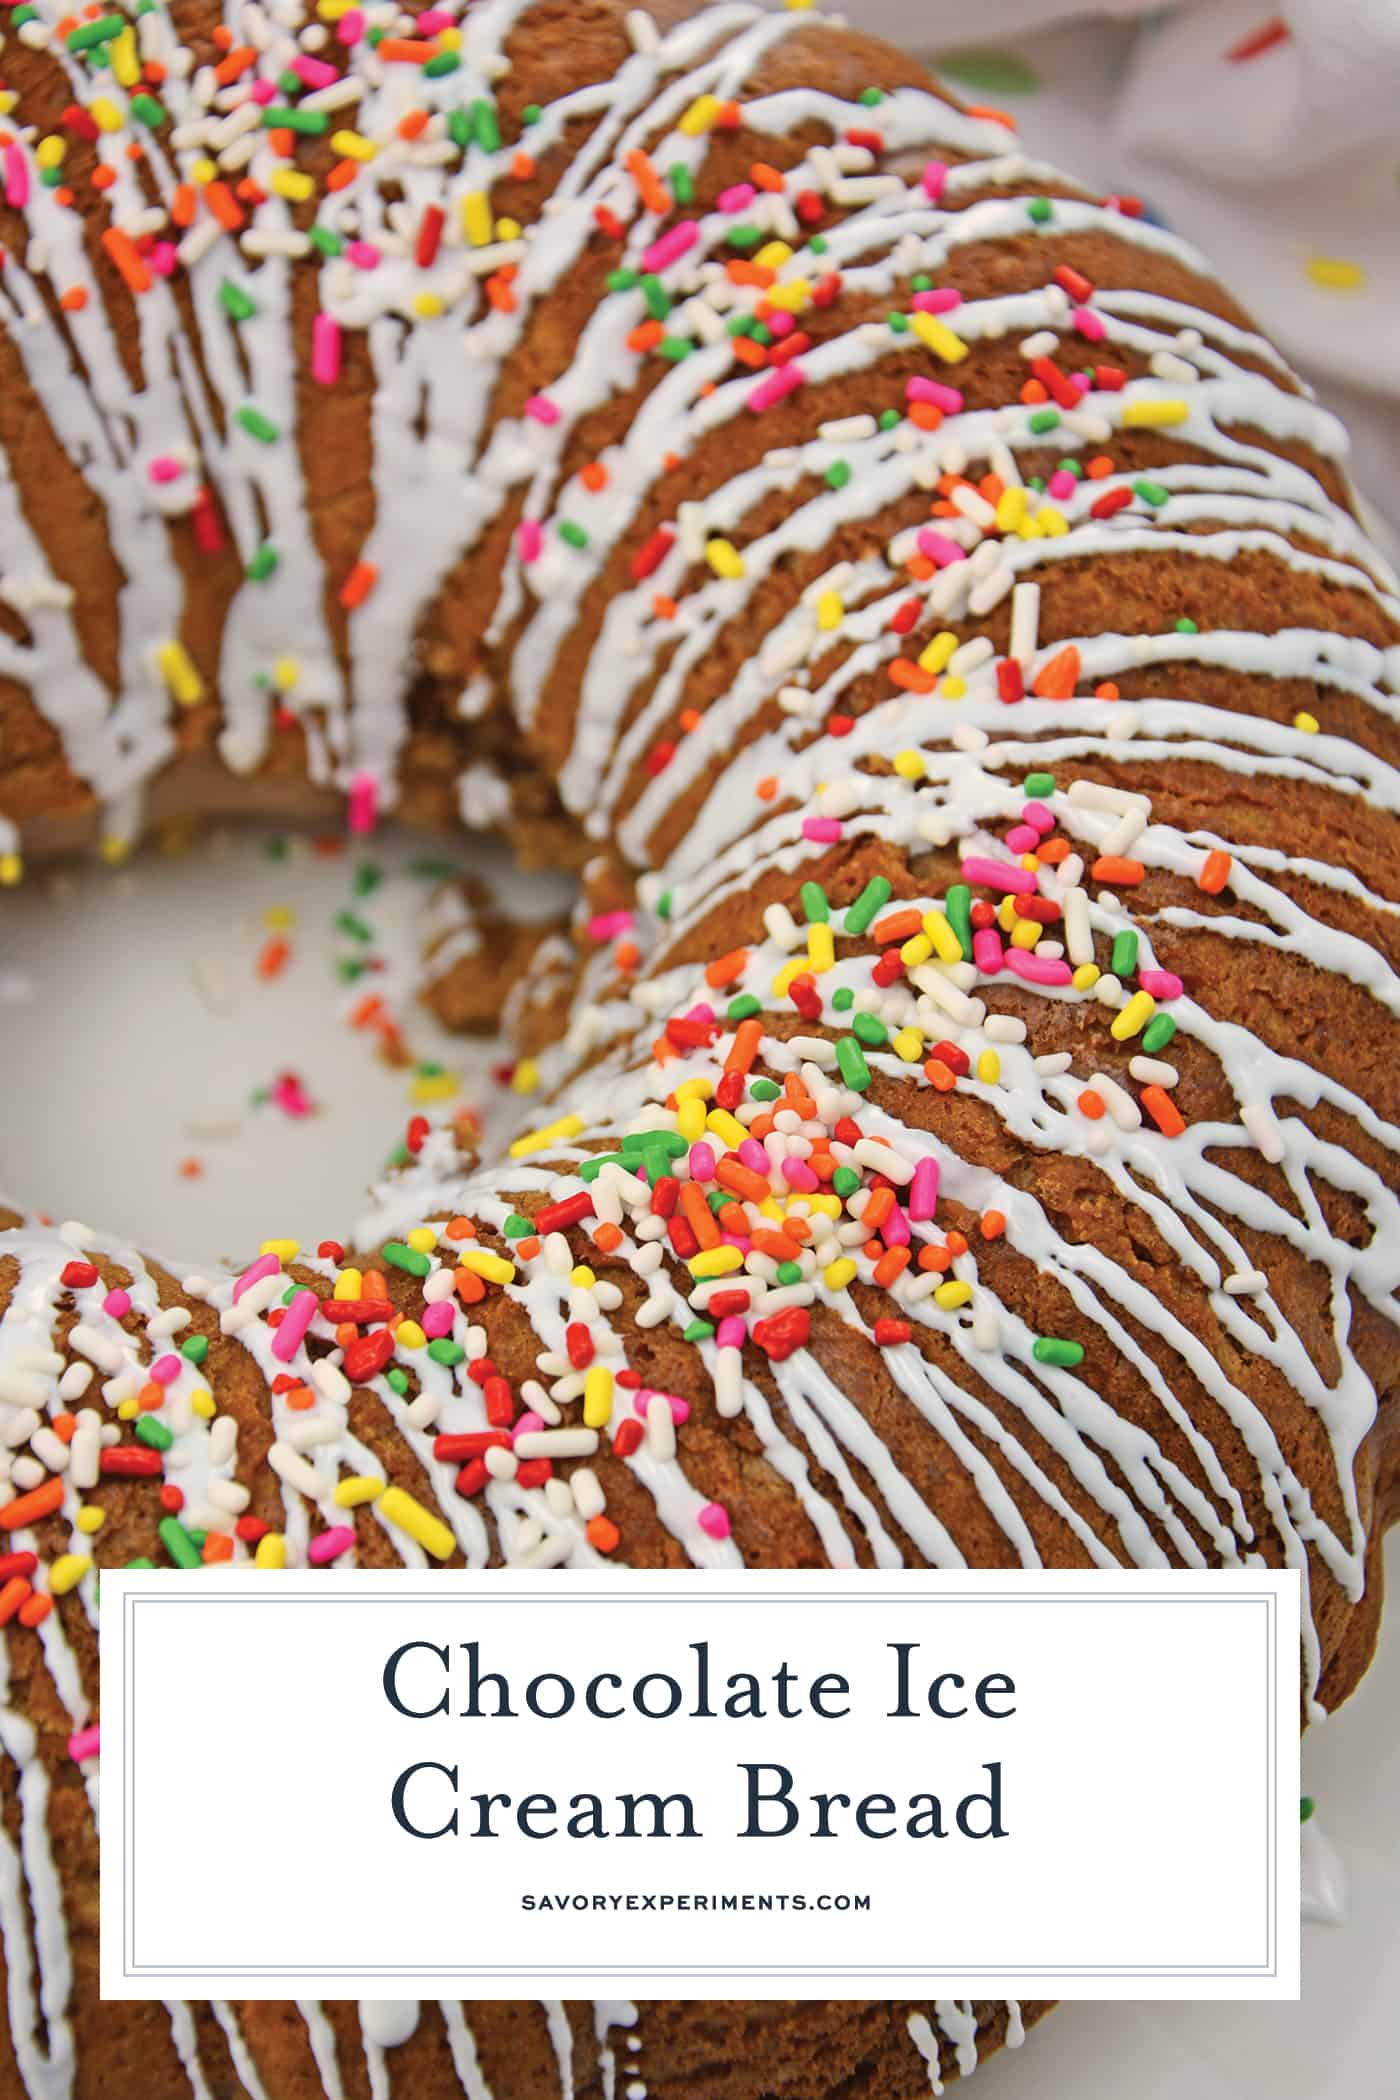 Chocolate ice cream bread with icing and sprinkles